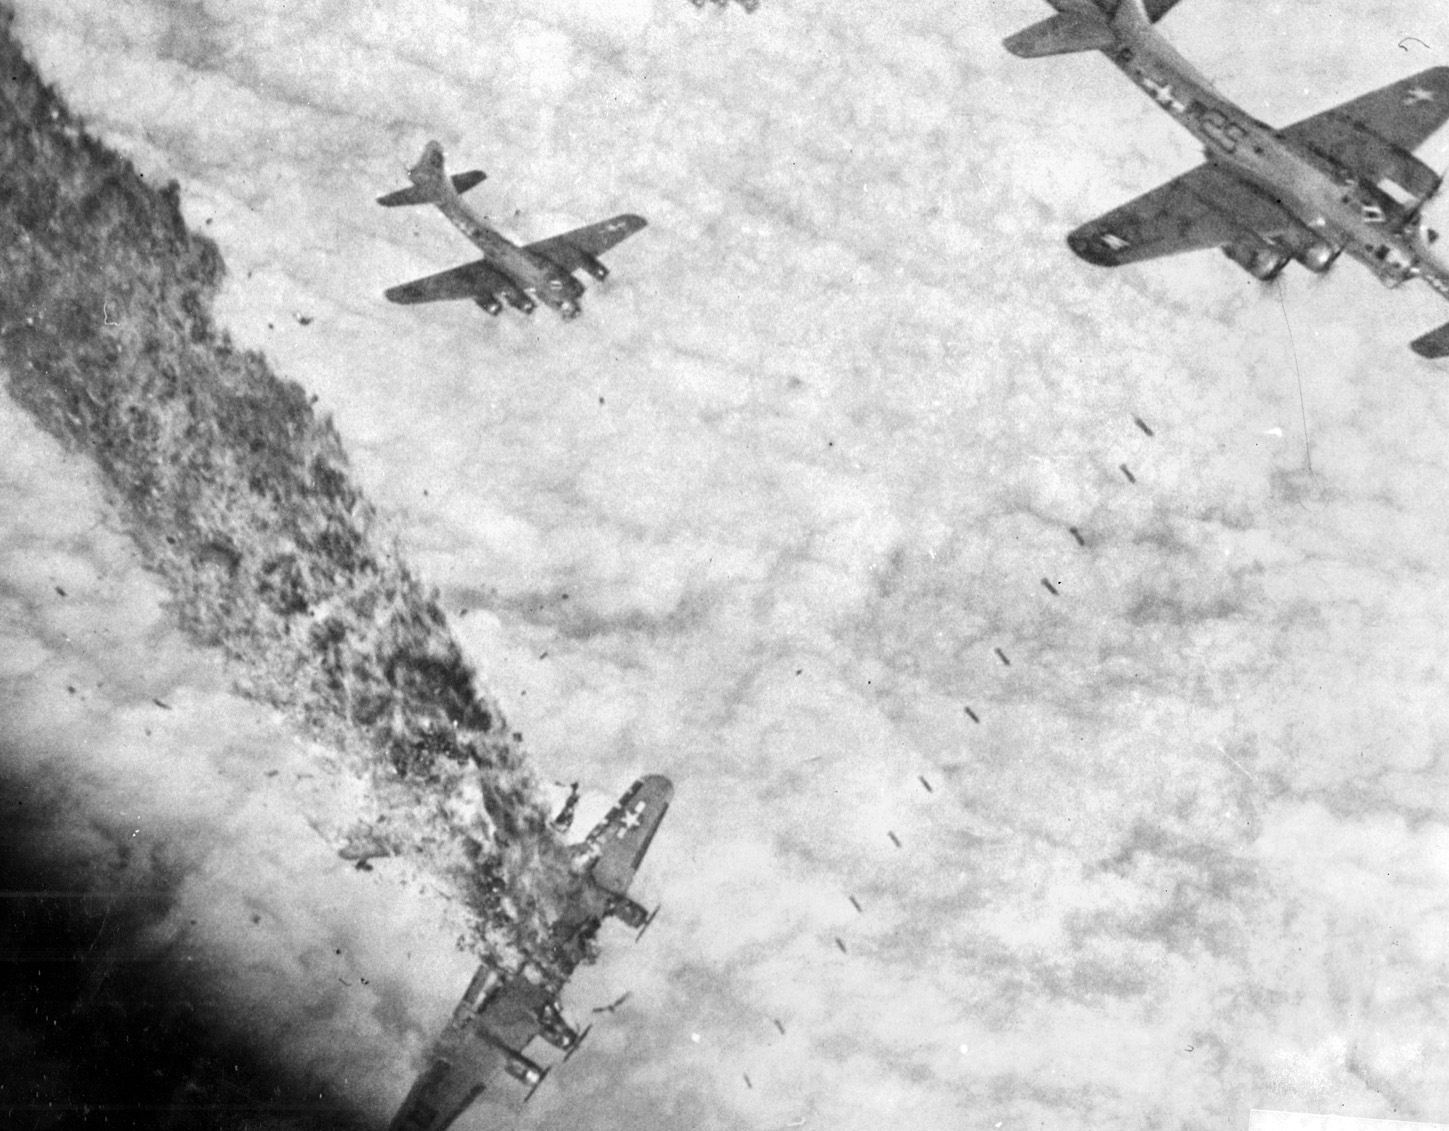 This horrific image depicts the death throes of a B-17 bomber shot down over Germany.  The aircraft took a direct hit from enemy fire, blowing the nose off the plane with the pilot, co-pilot, navigator, and bombardier trapped inside.